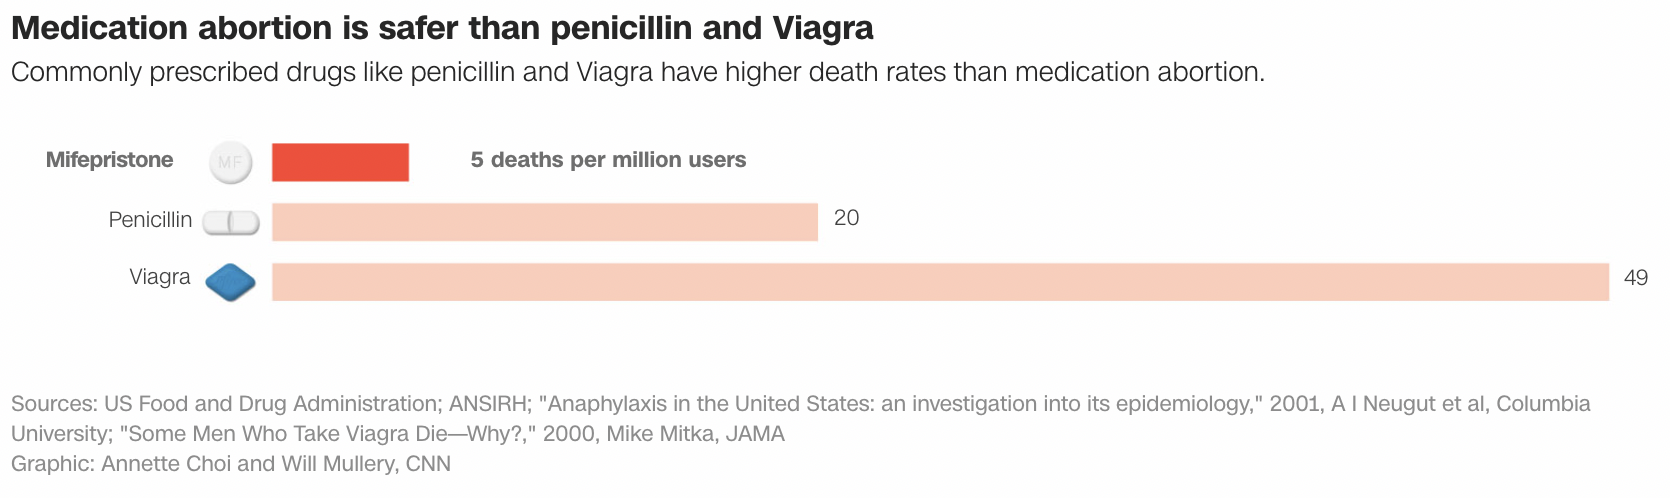 Abortion pill restricted by FDA record safer than penicillin, Viagra